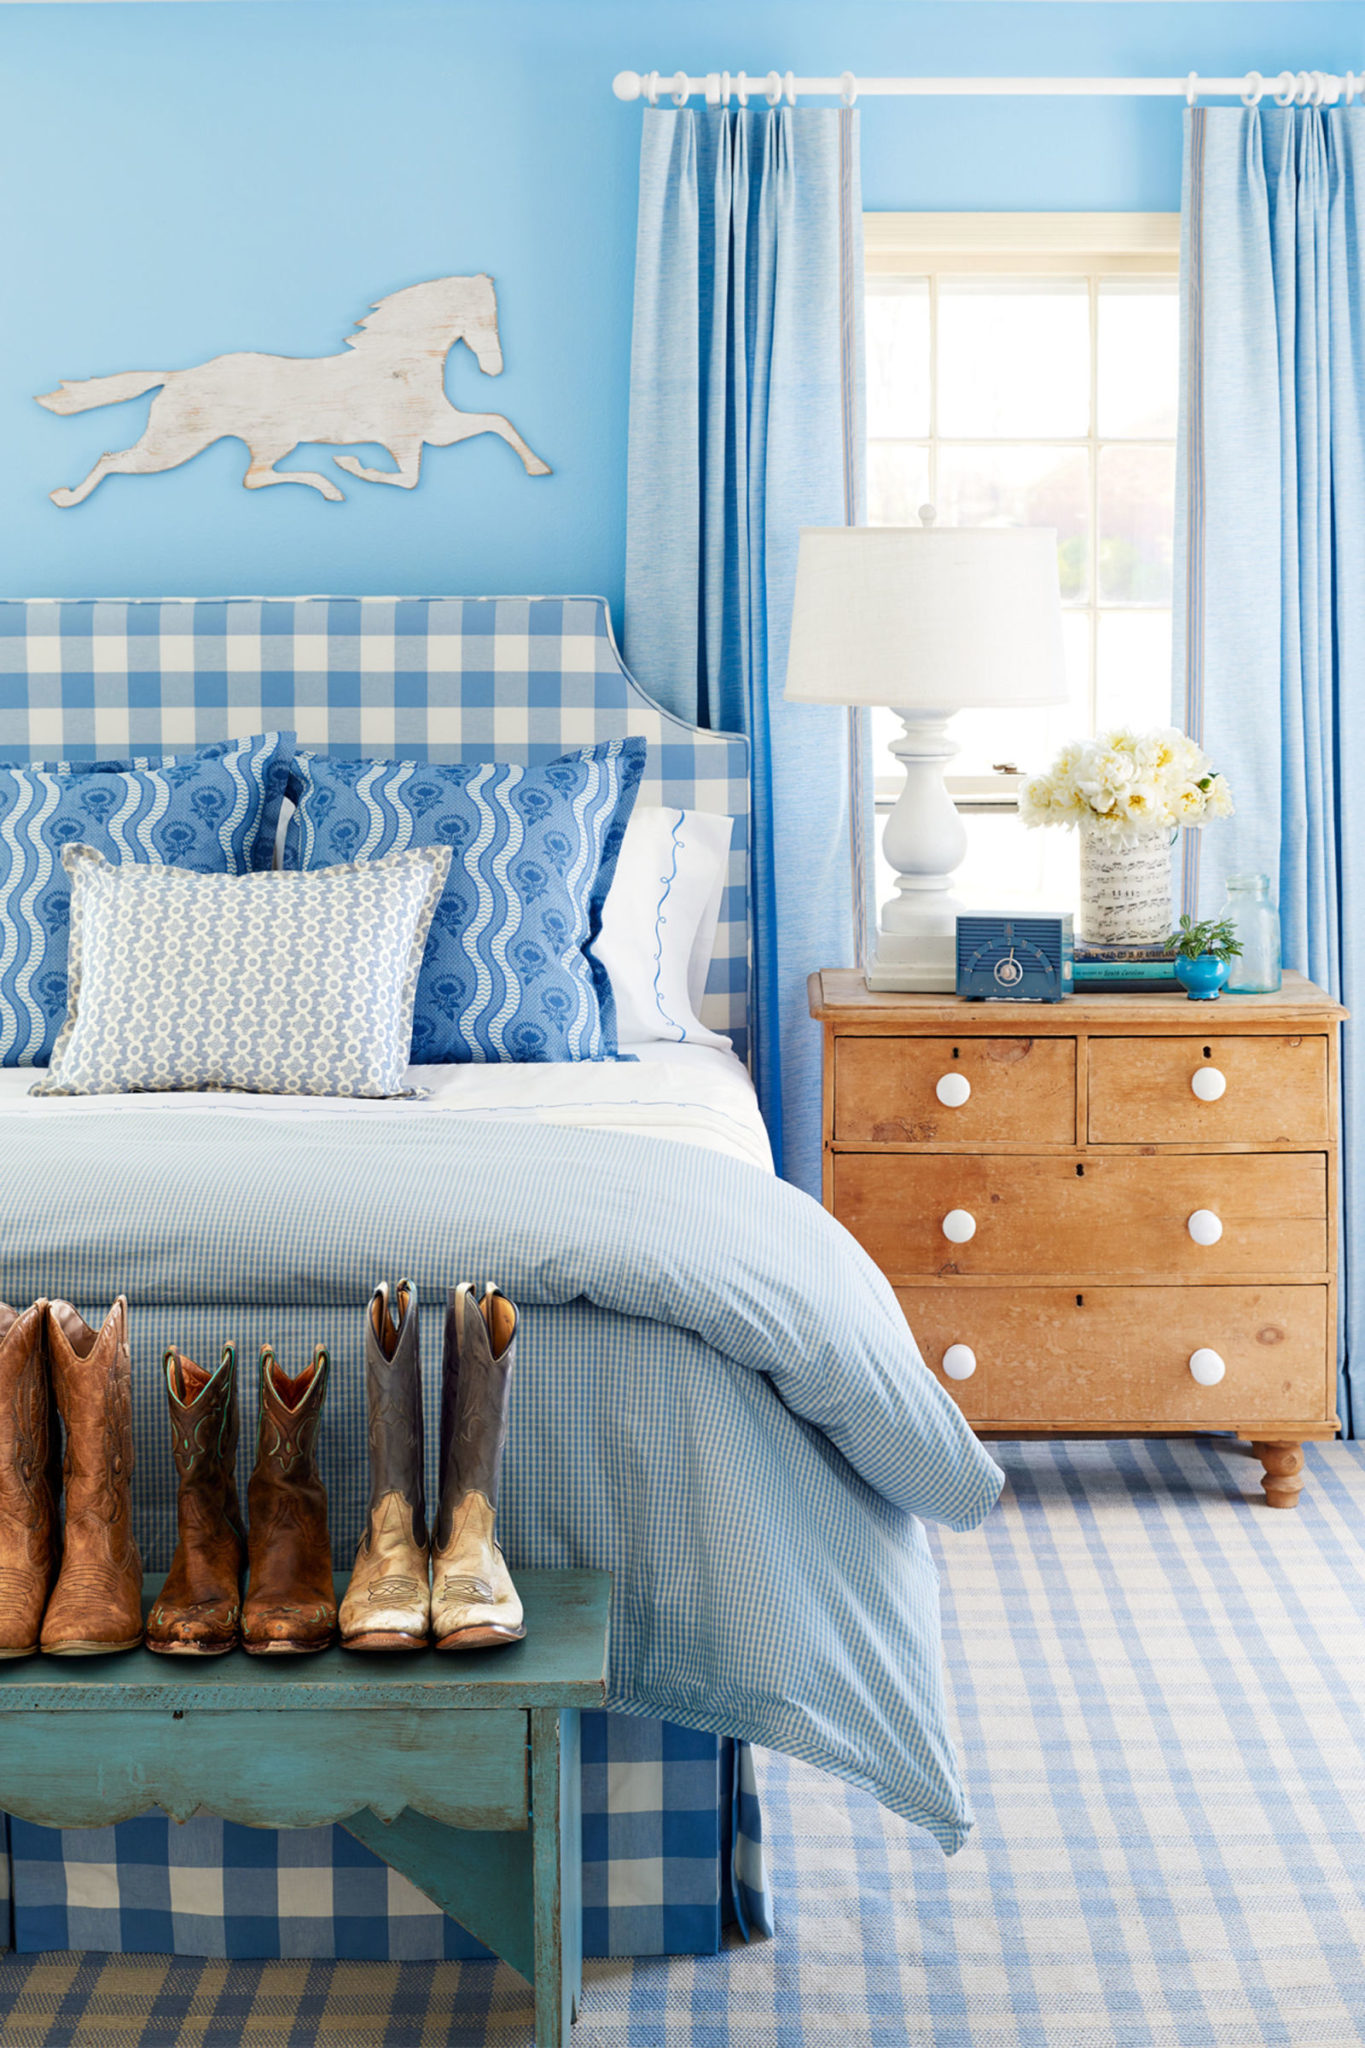 Fresh and youthful blue bedroom with shabby chic elements